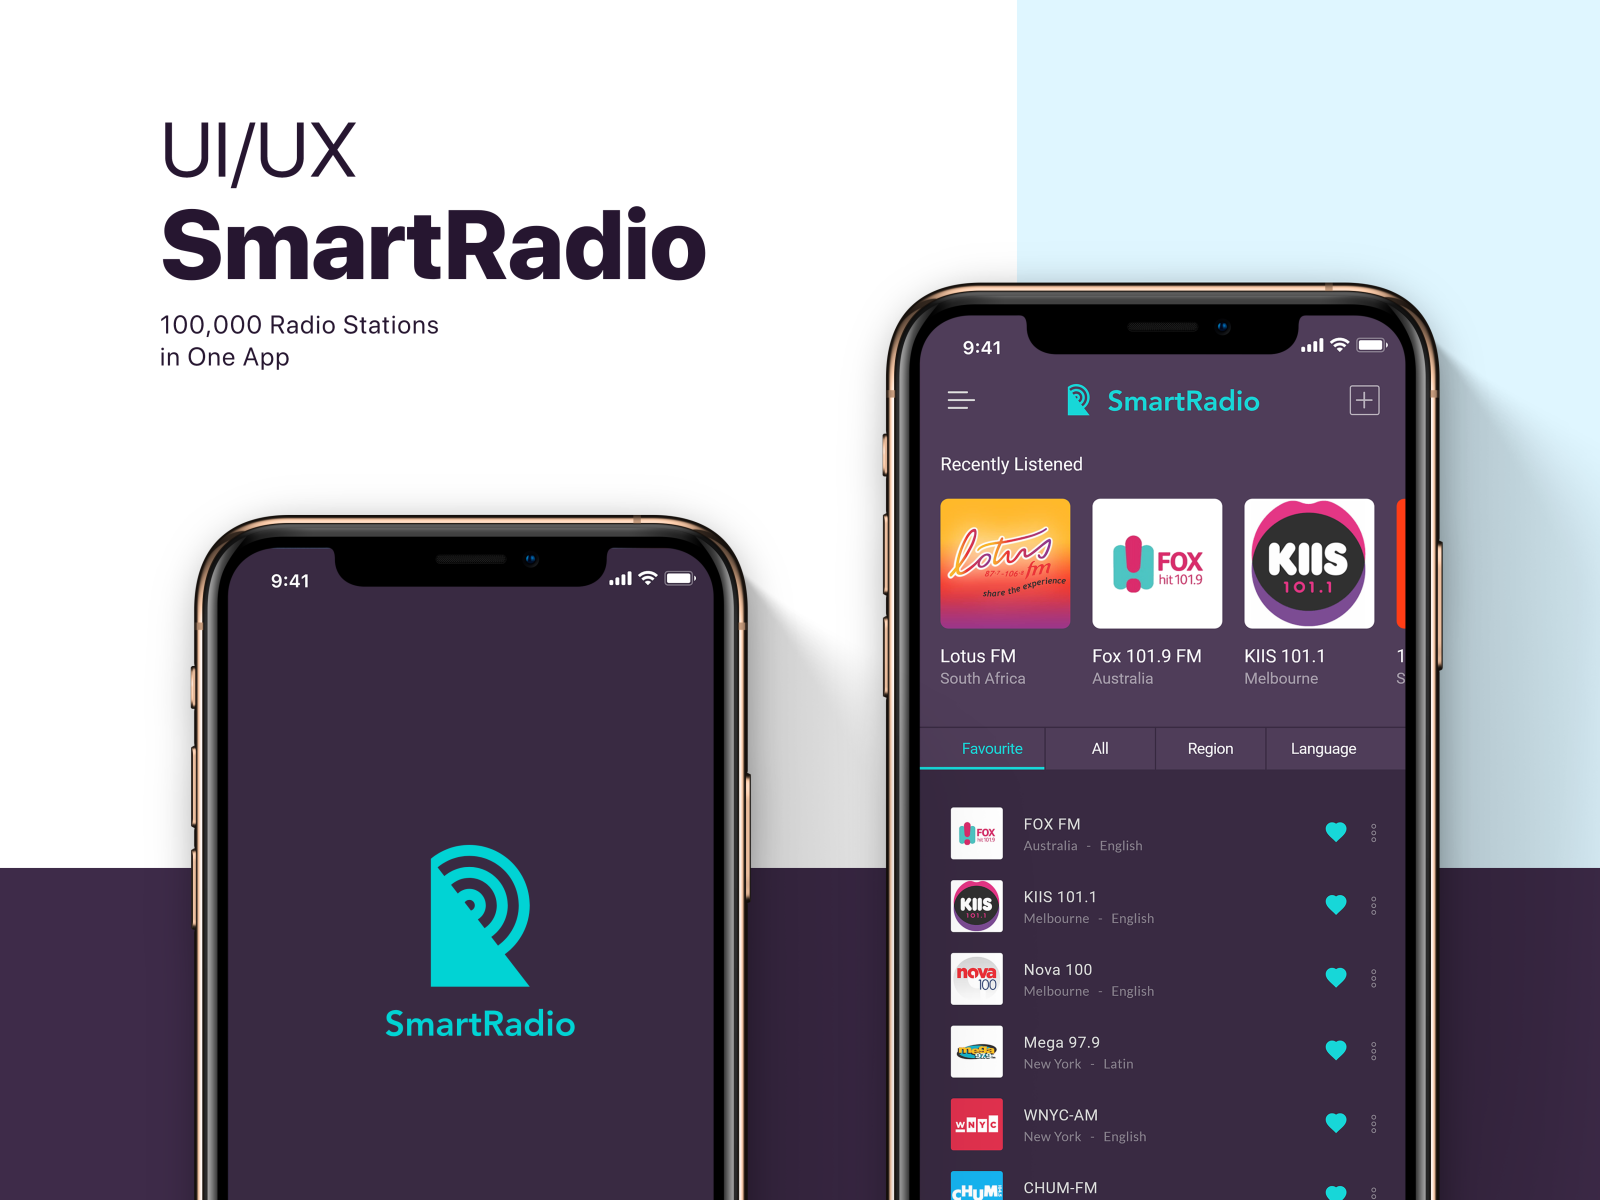 UI UX Interaction Design for Online Radio Mobile App by 